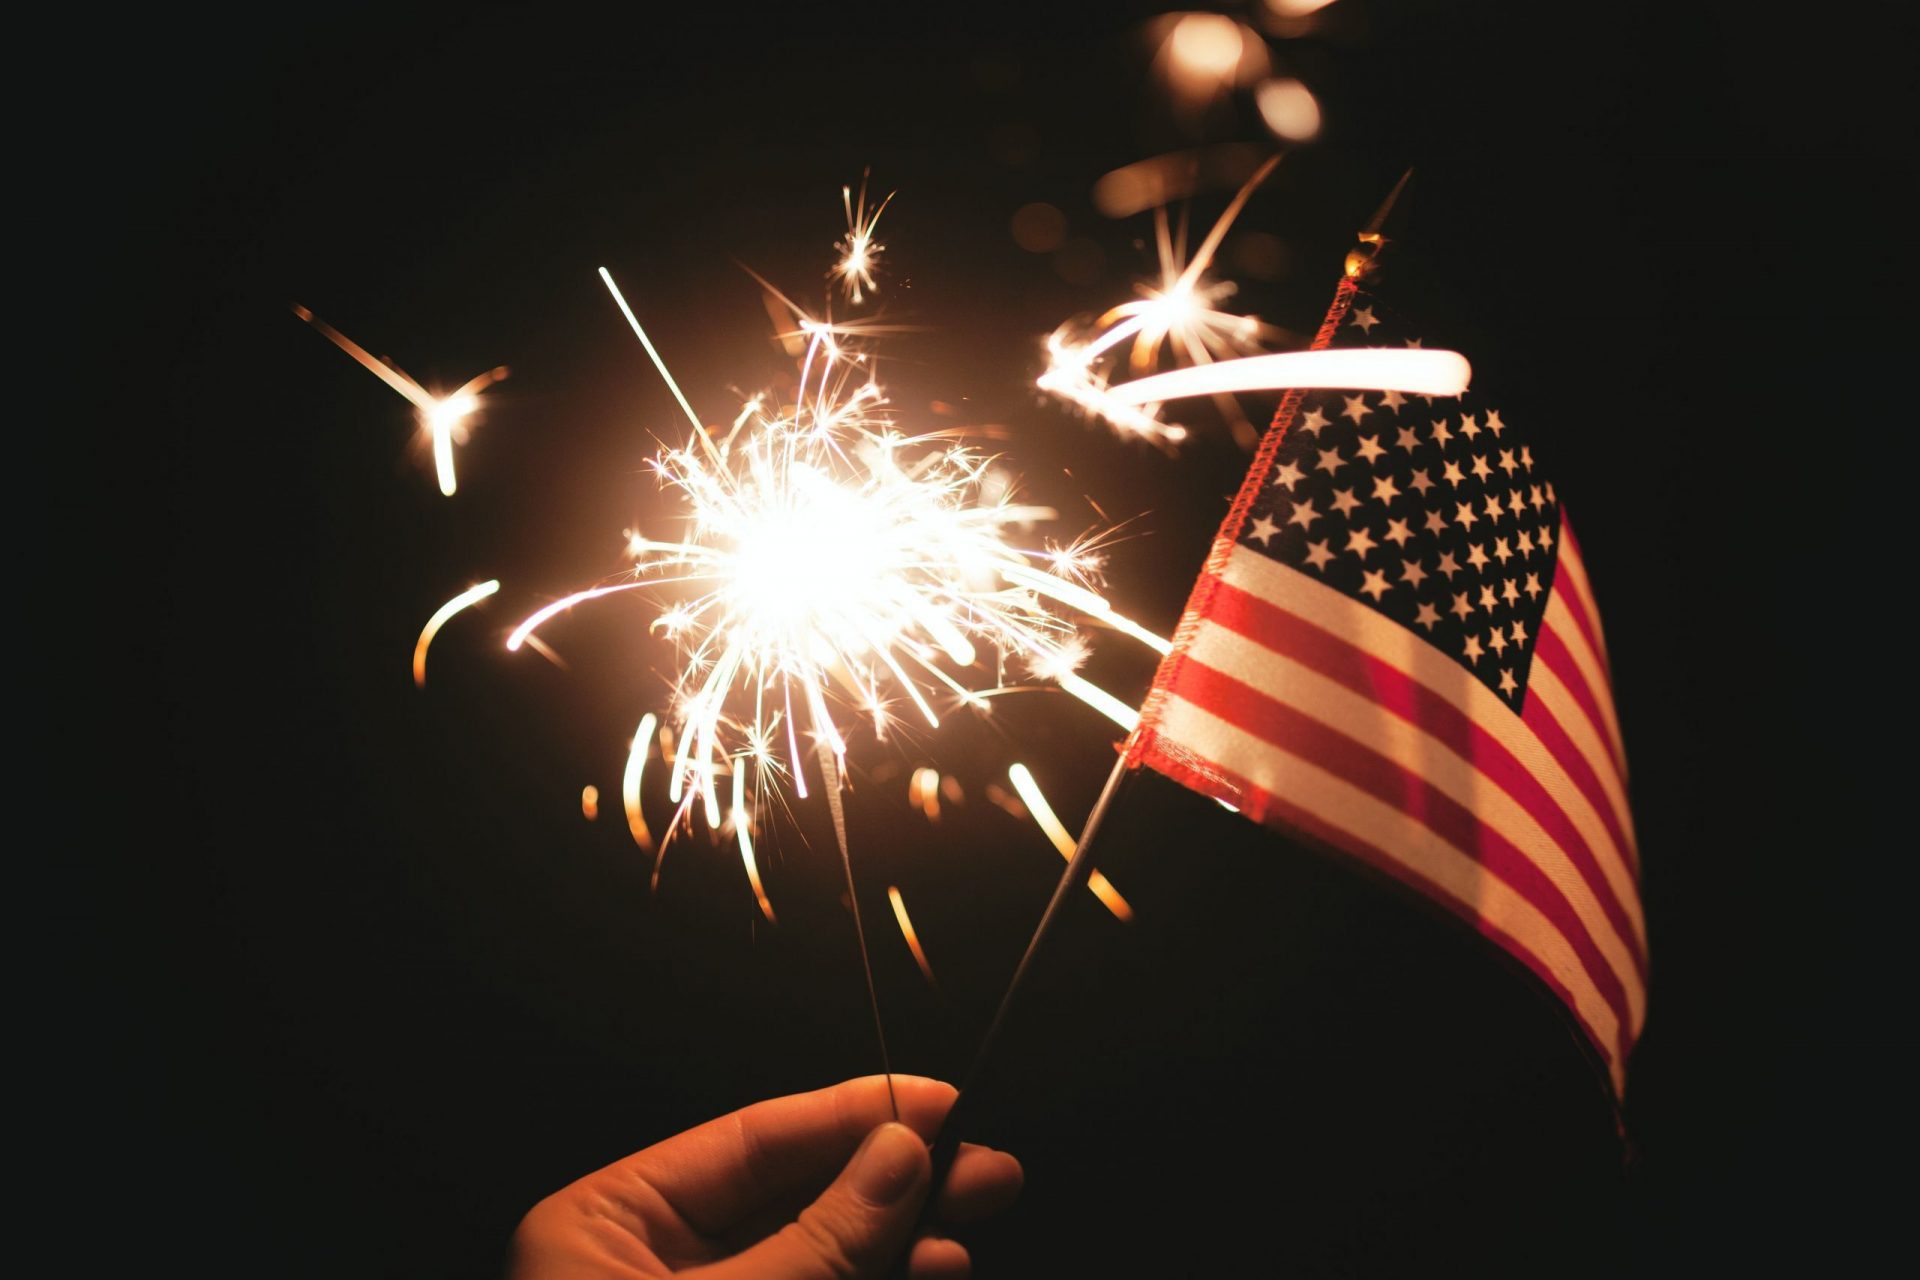 Safety Tips for the 4th of July